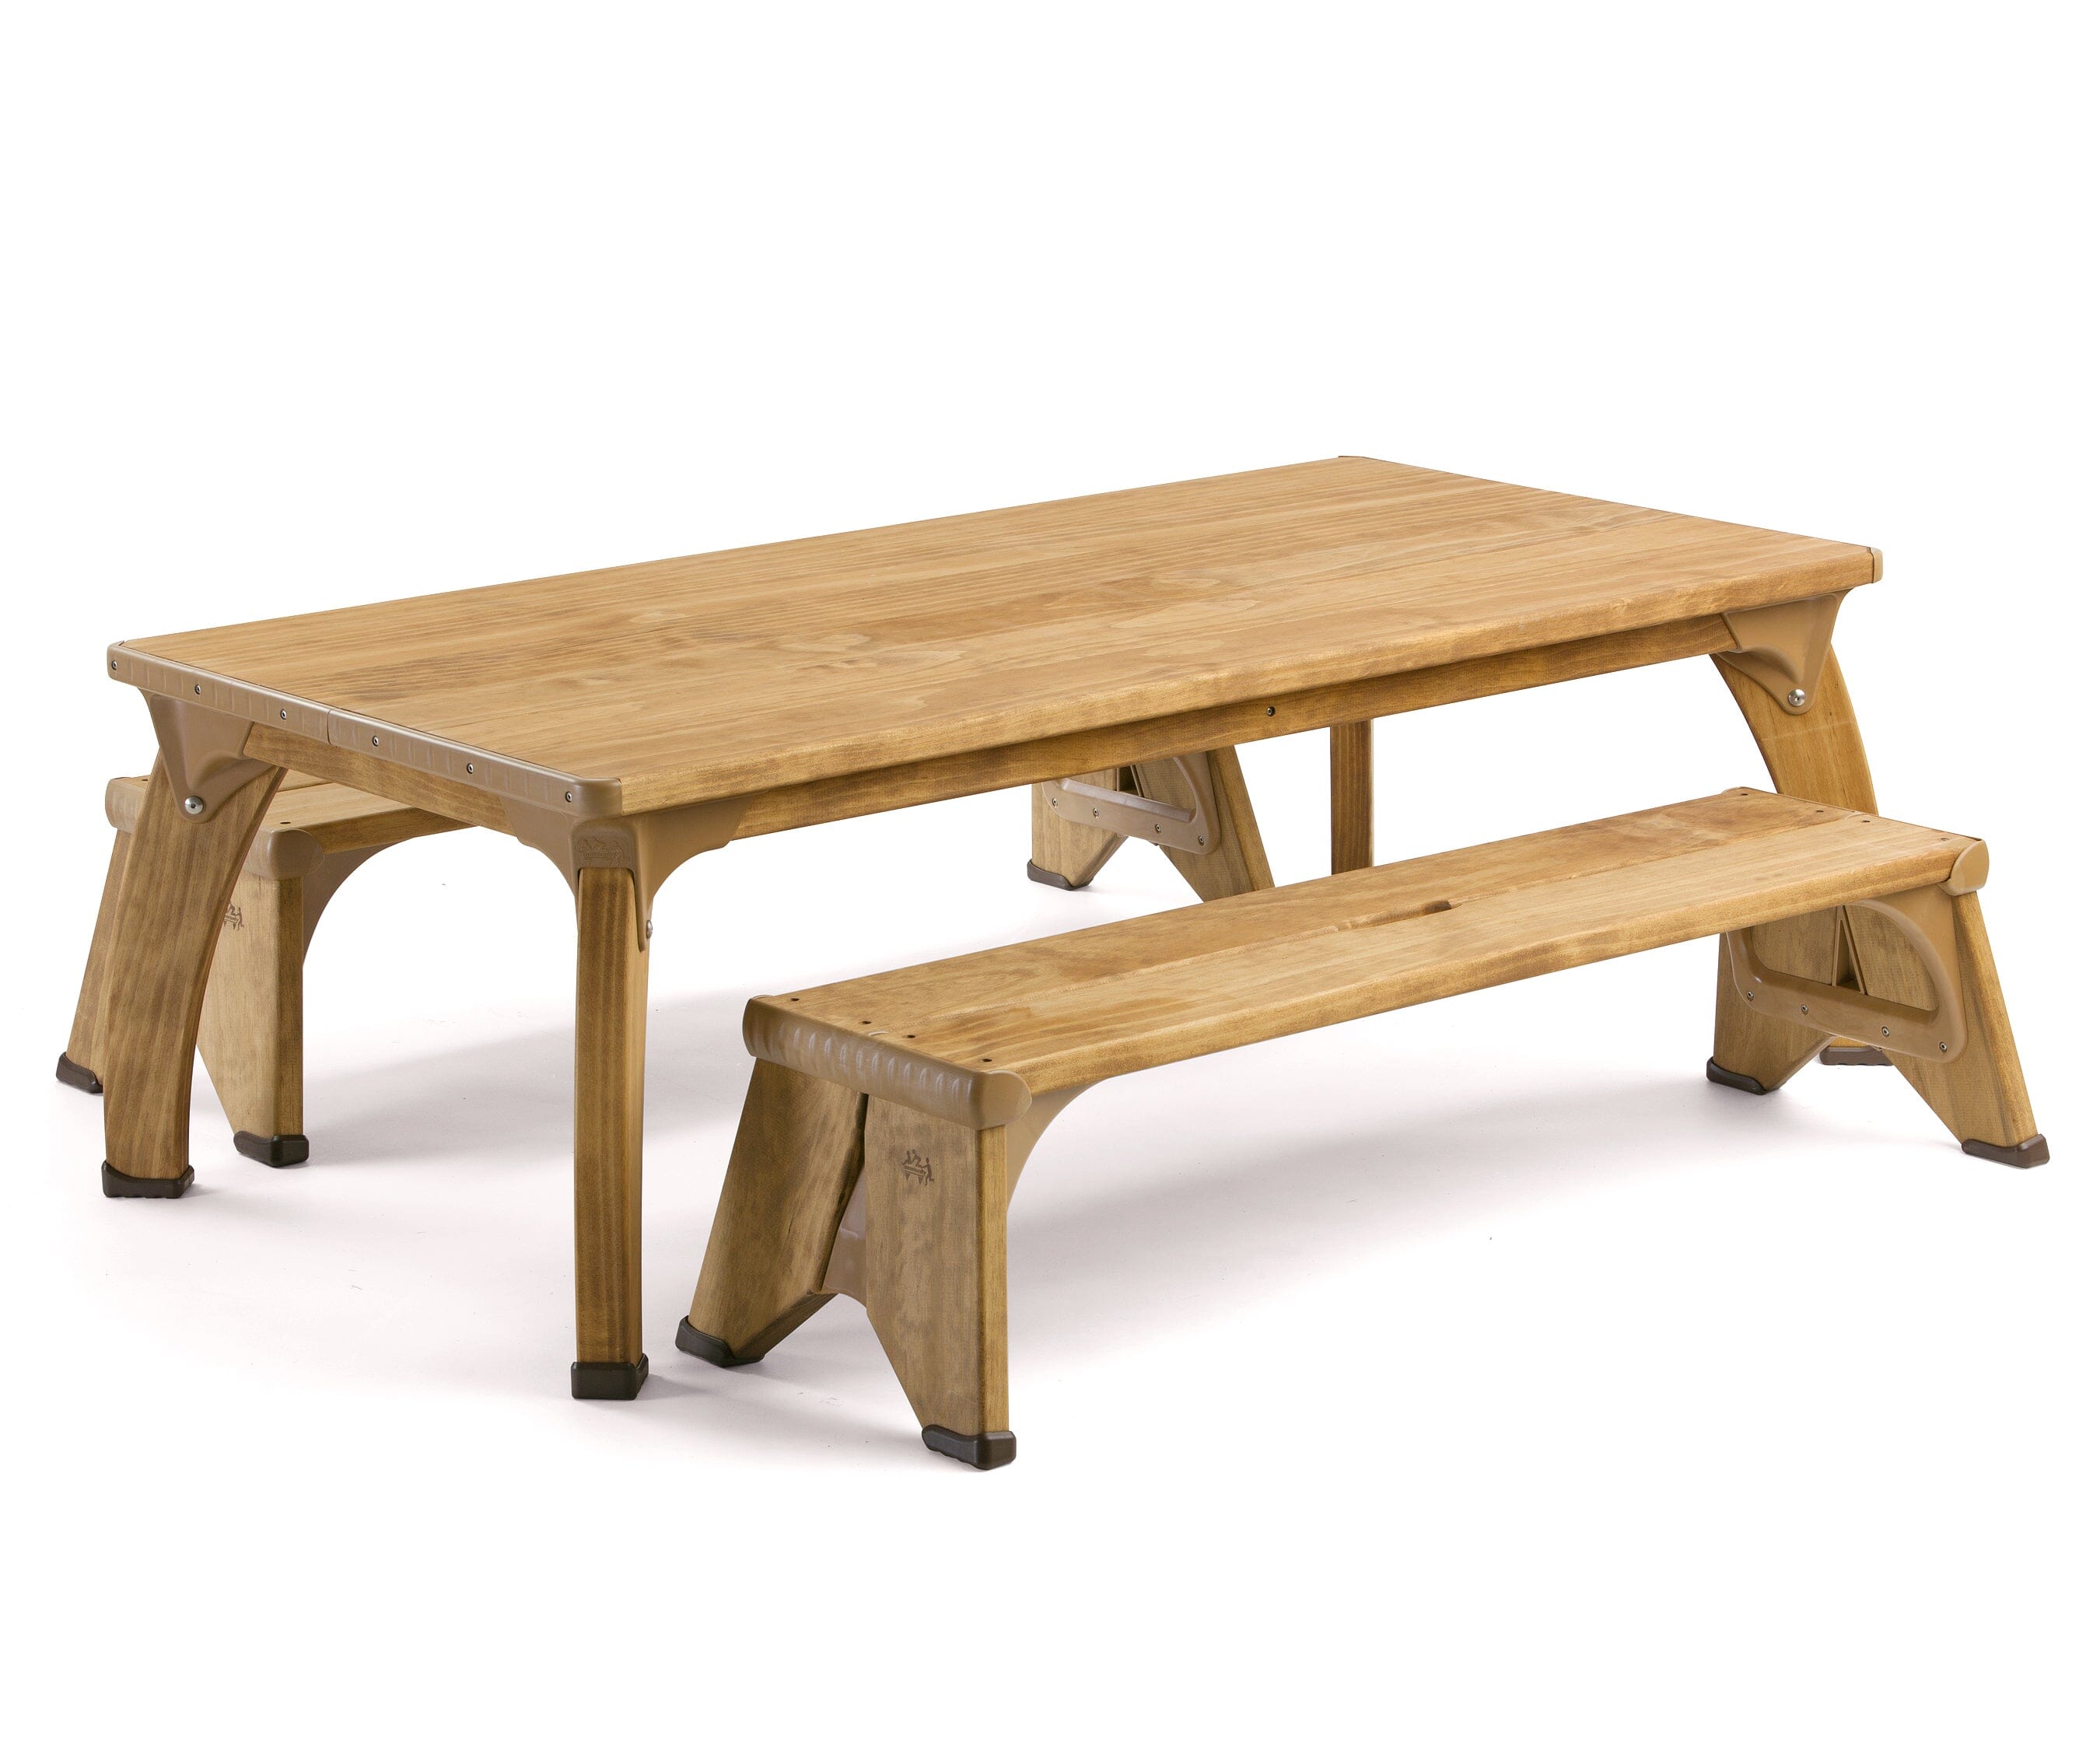 Outlast Project Table & 2 Benches Set by Community Playthings - louisekool